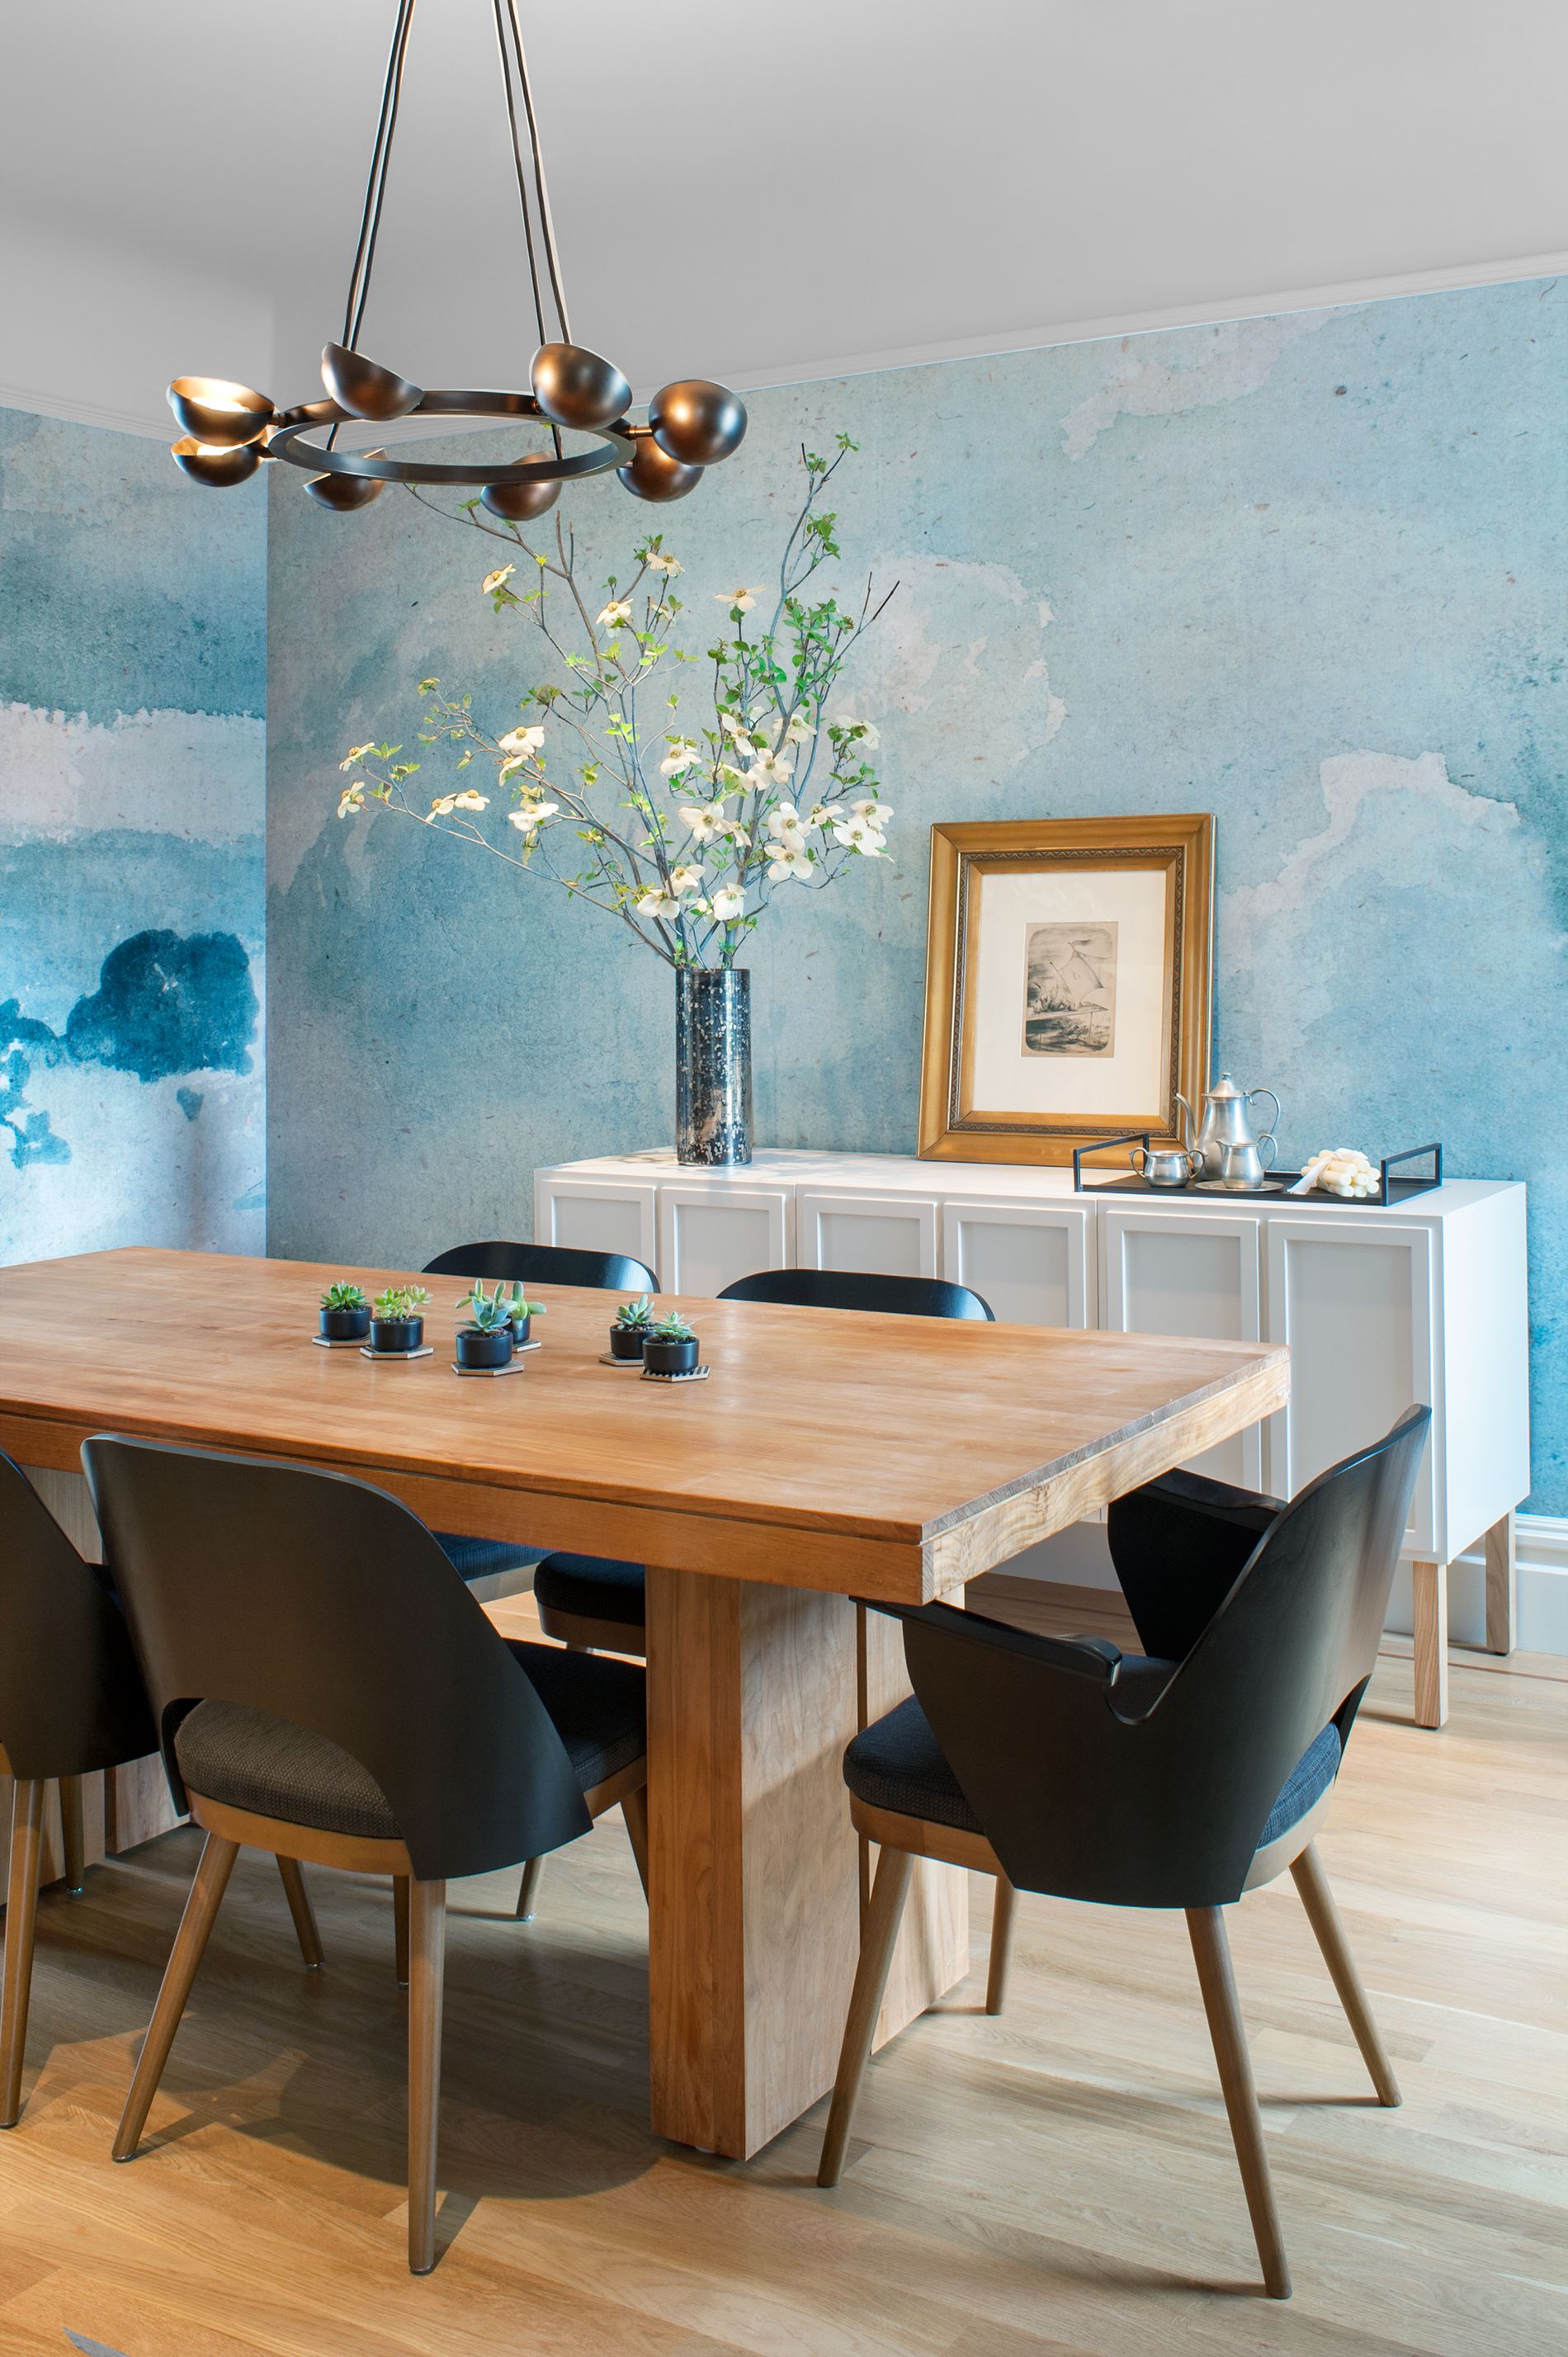 Best wallpaper for dining room - caqwetrac